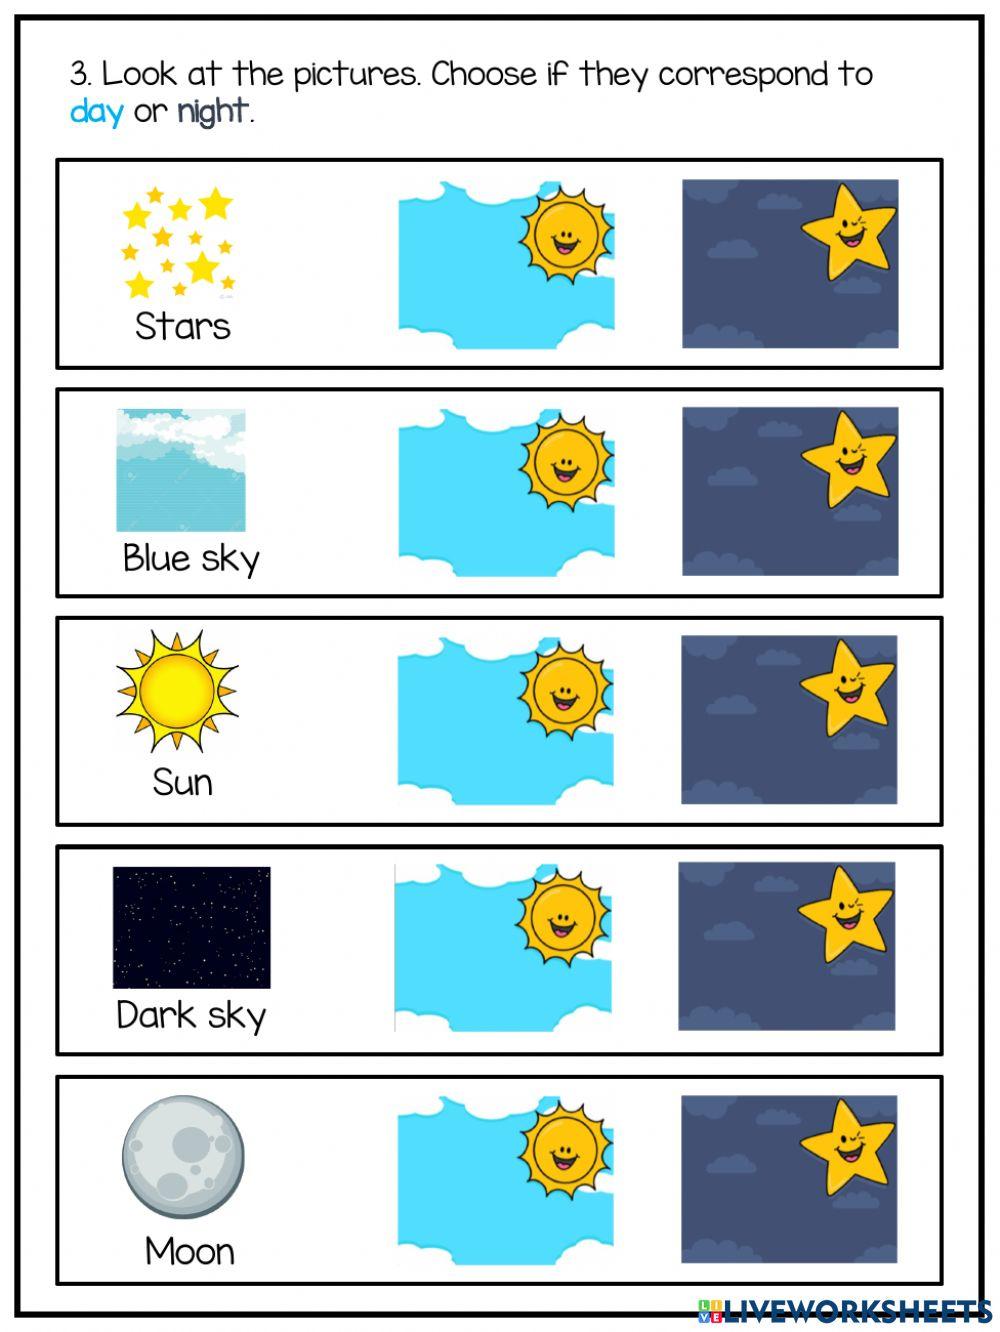 Differences between day and night